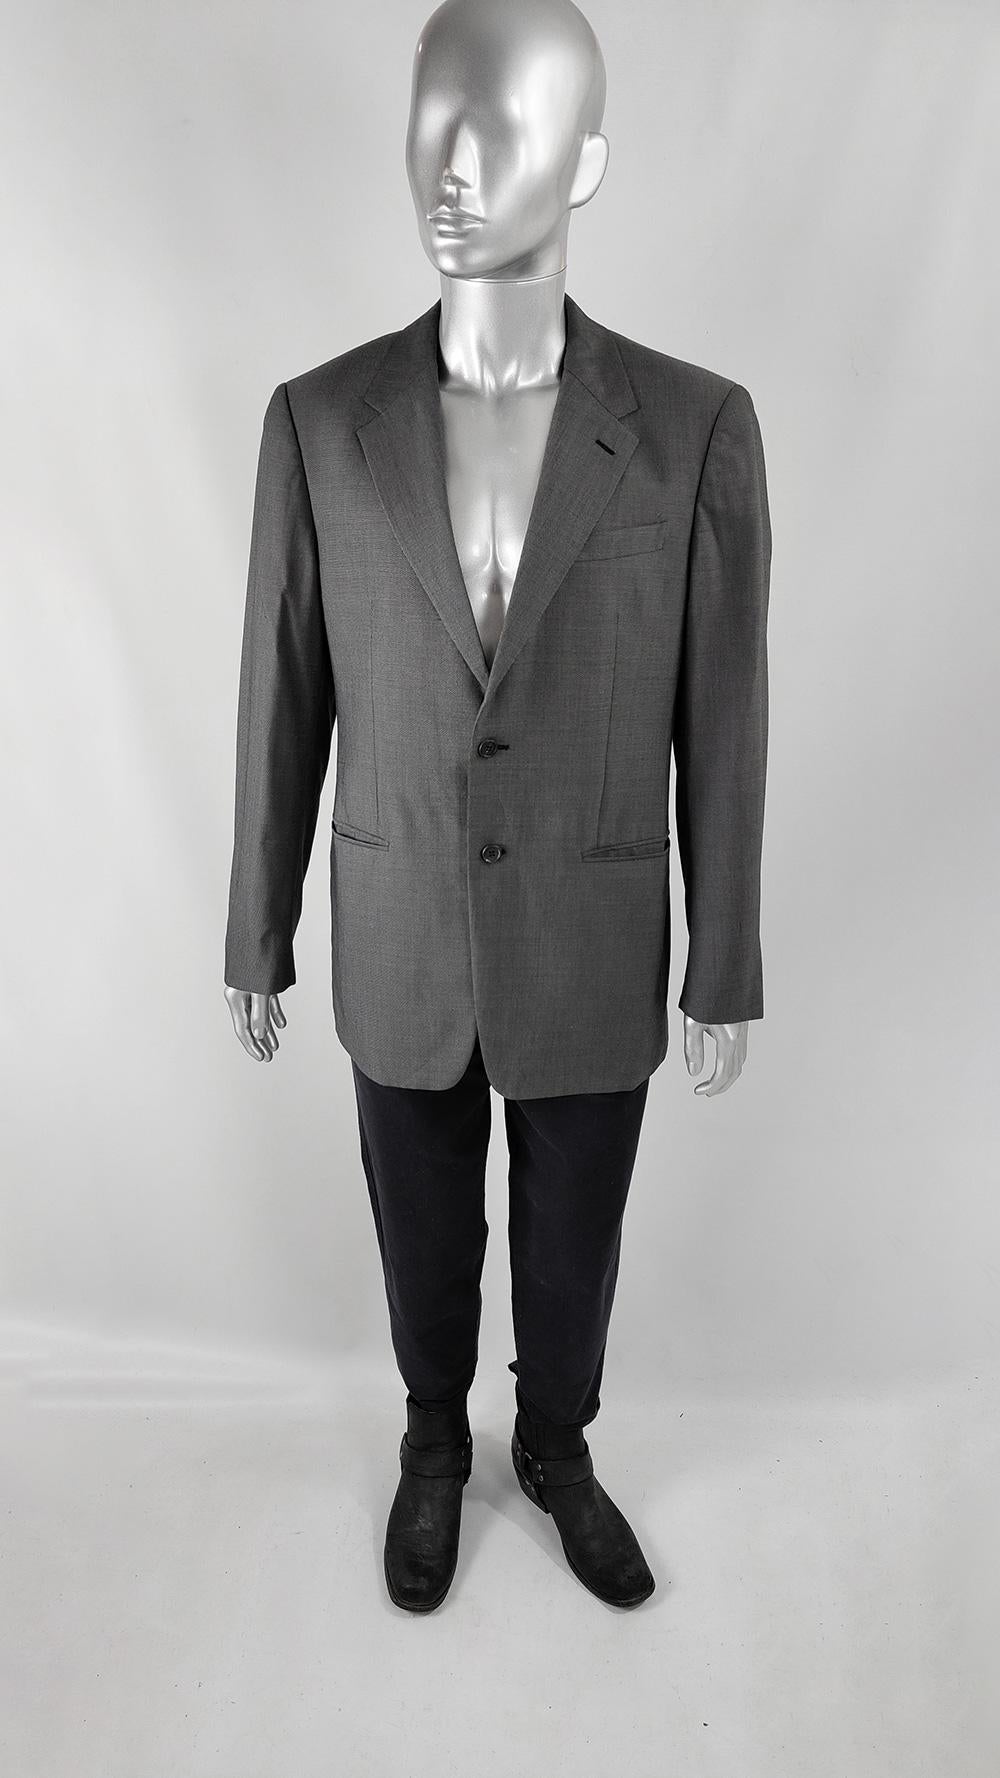 An excellent and sleek vintage mens blazer jacket from the early 2000s by luxury Italian fashion house, Prada. Made in Italy, from a virgin wool and silk fabric with notched lapels and welt pockets giving a minimalist look.

Size: Marked IT 52R